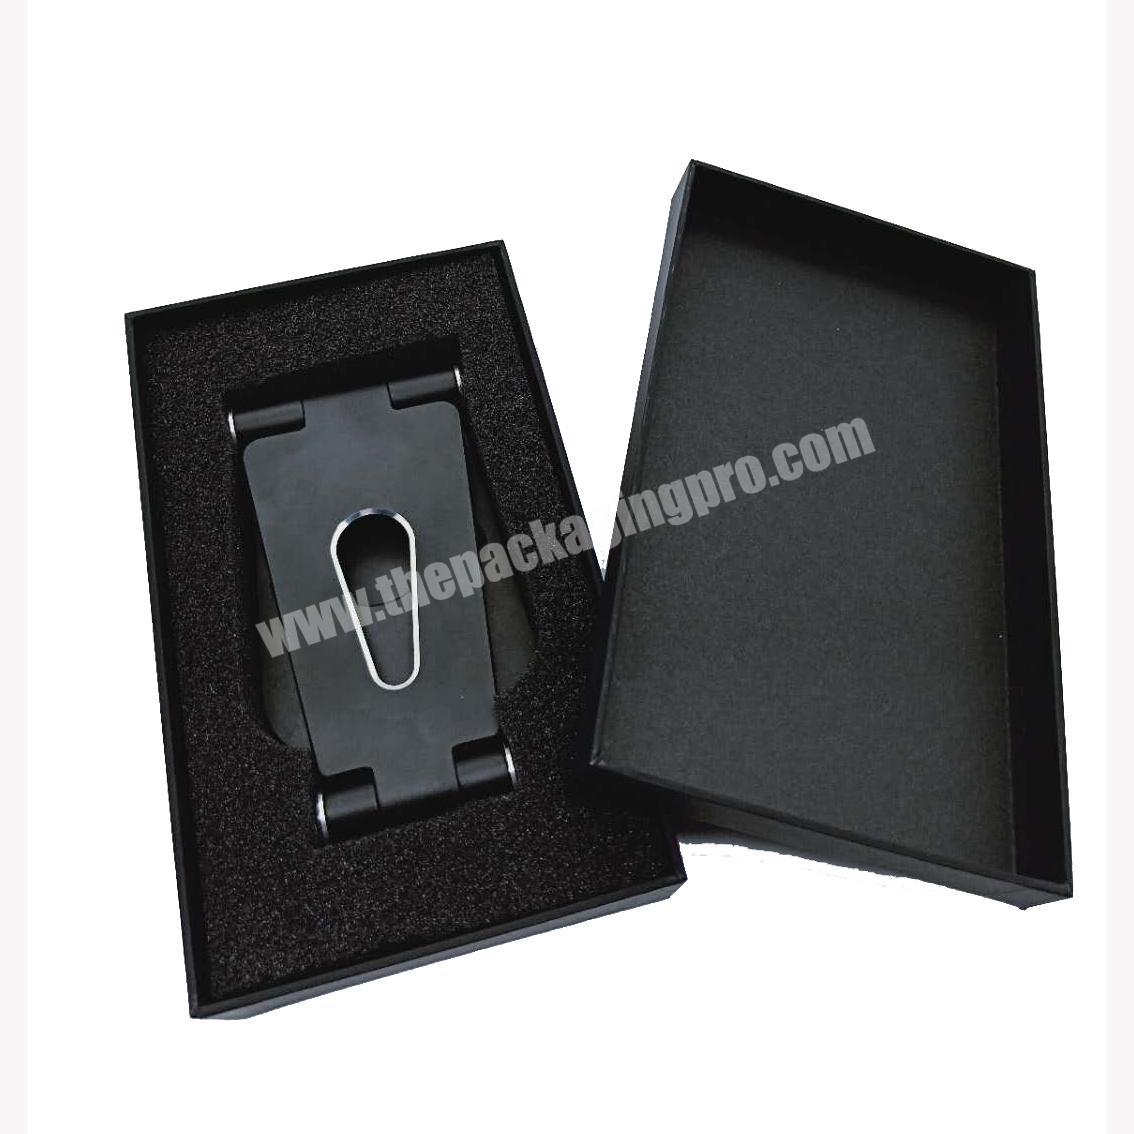 Reliable high quality factory supplier of black gift box plain boxes